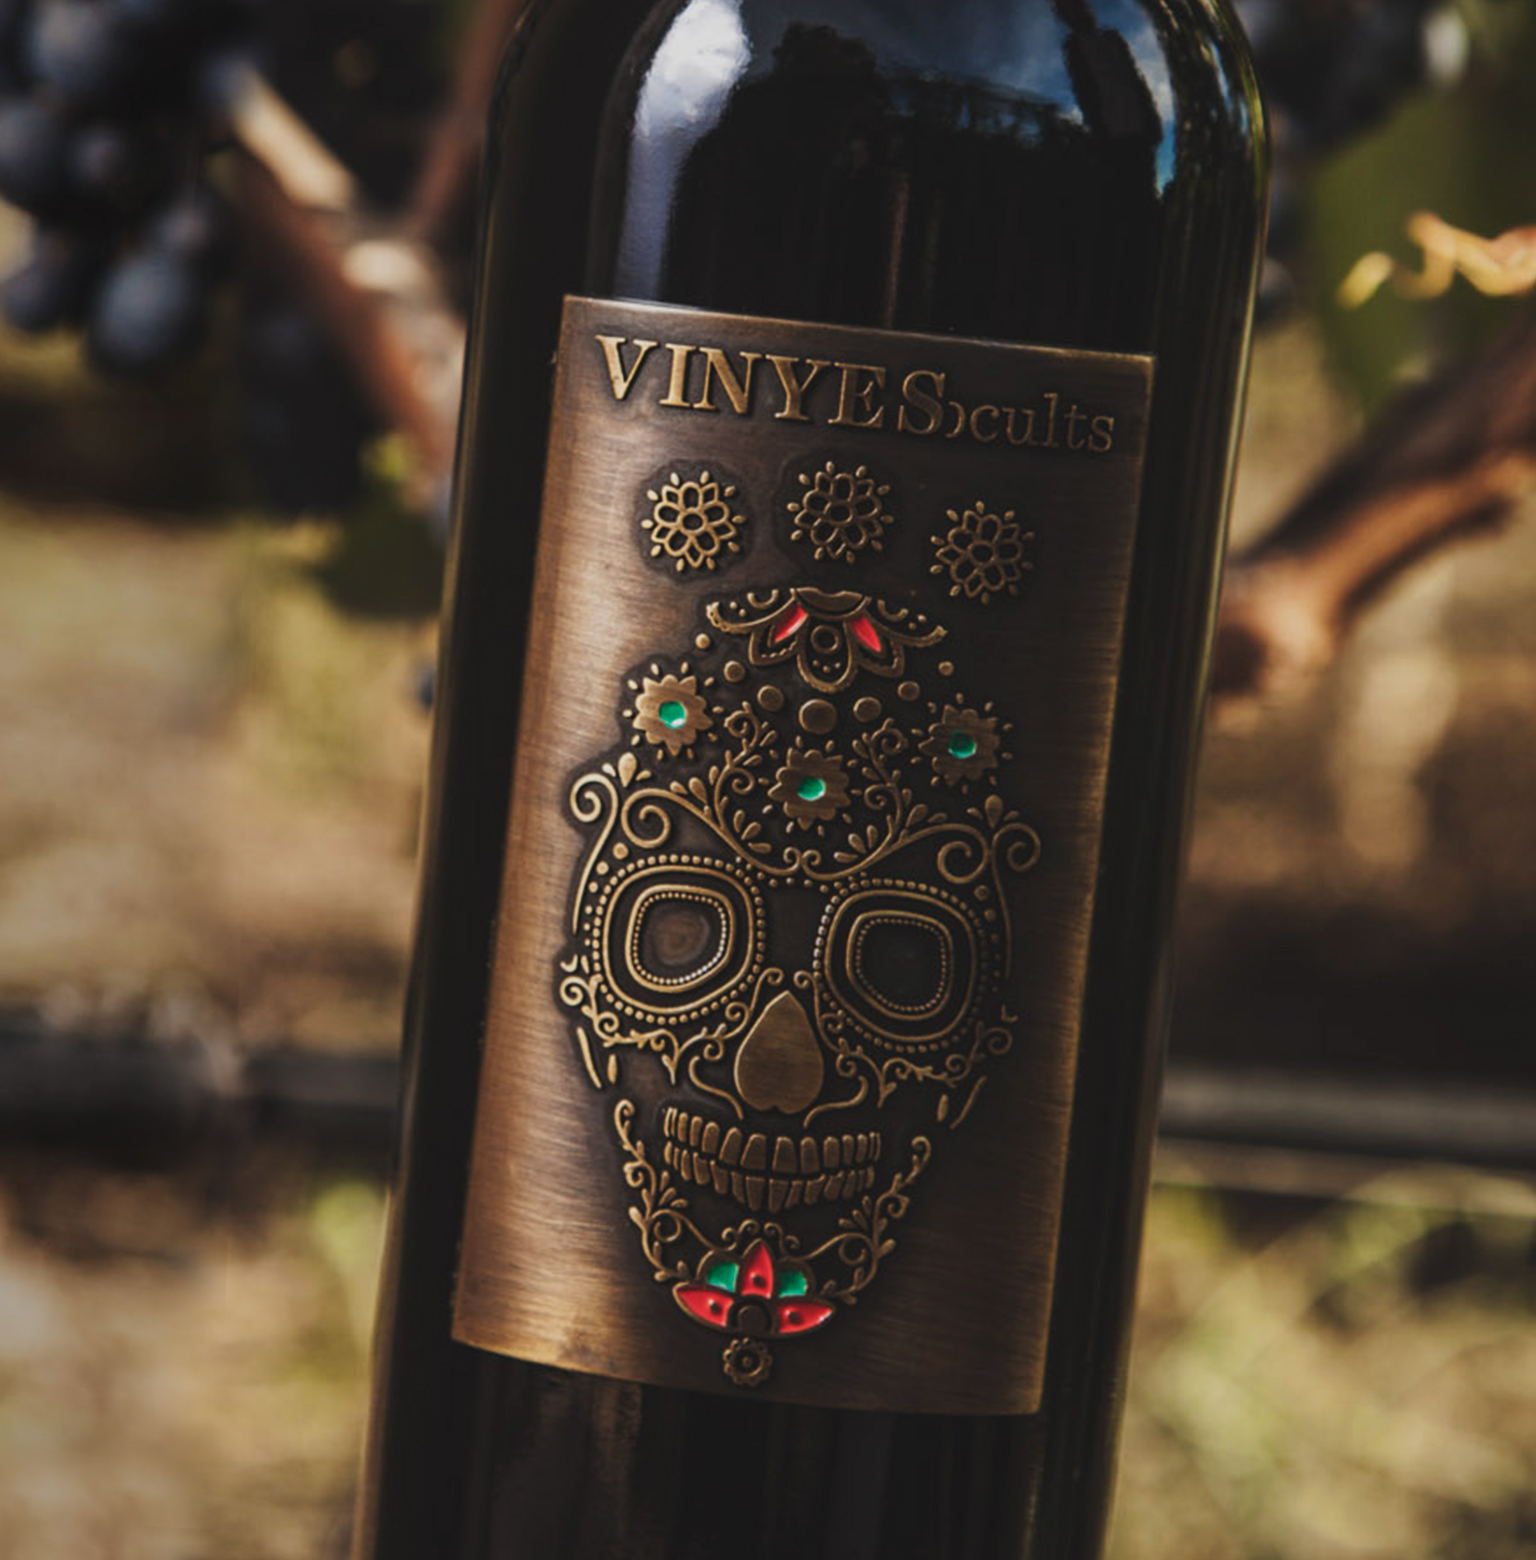 Strong, Rustic and Enigmatic Skull Wine Label Design from Argentina